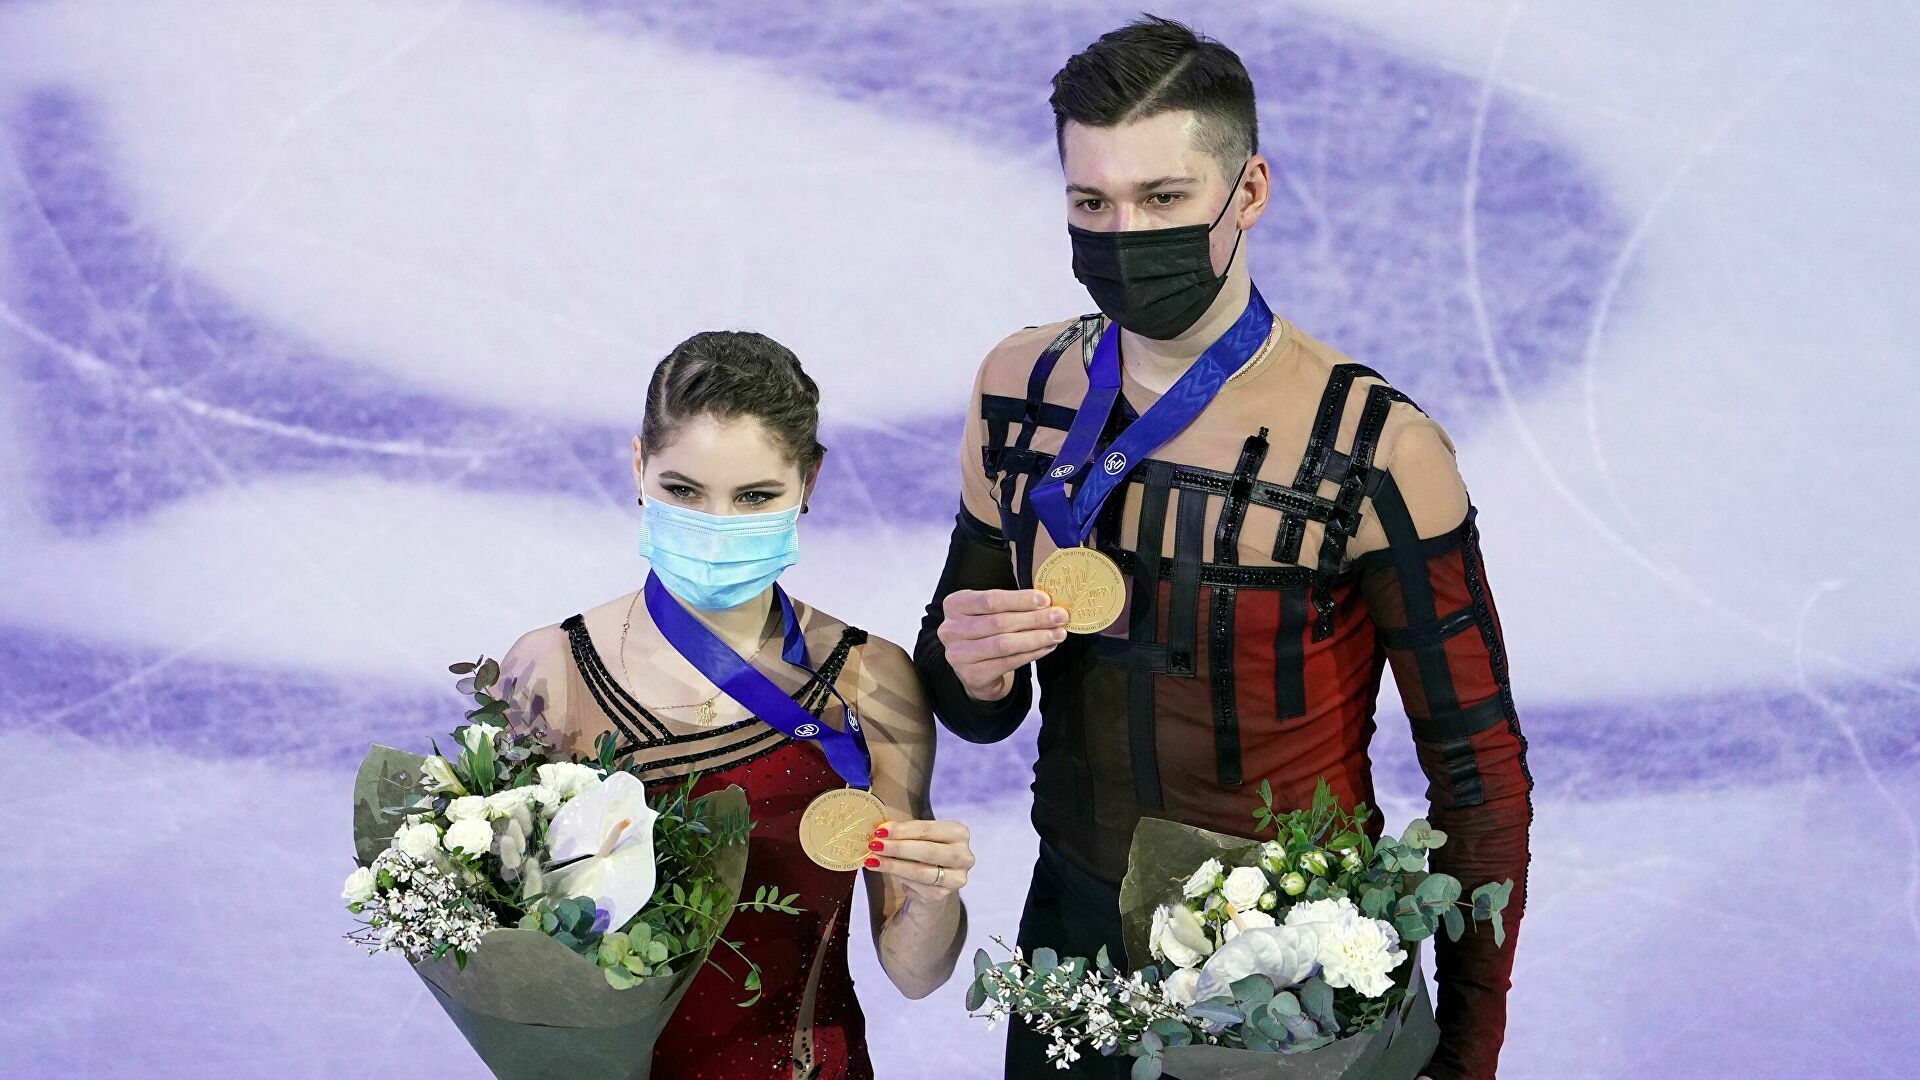 For the first time since 2013, Russian figure skaters became world champions in pair skating